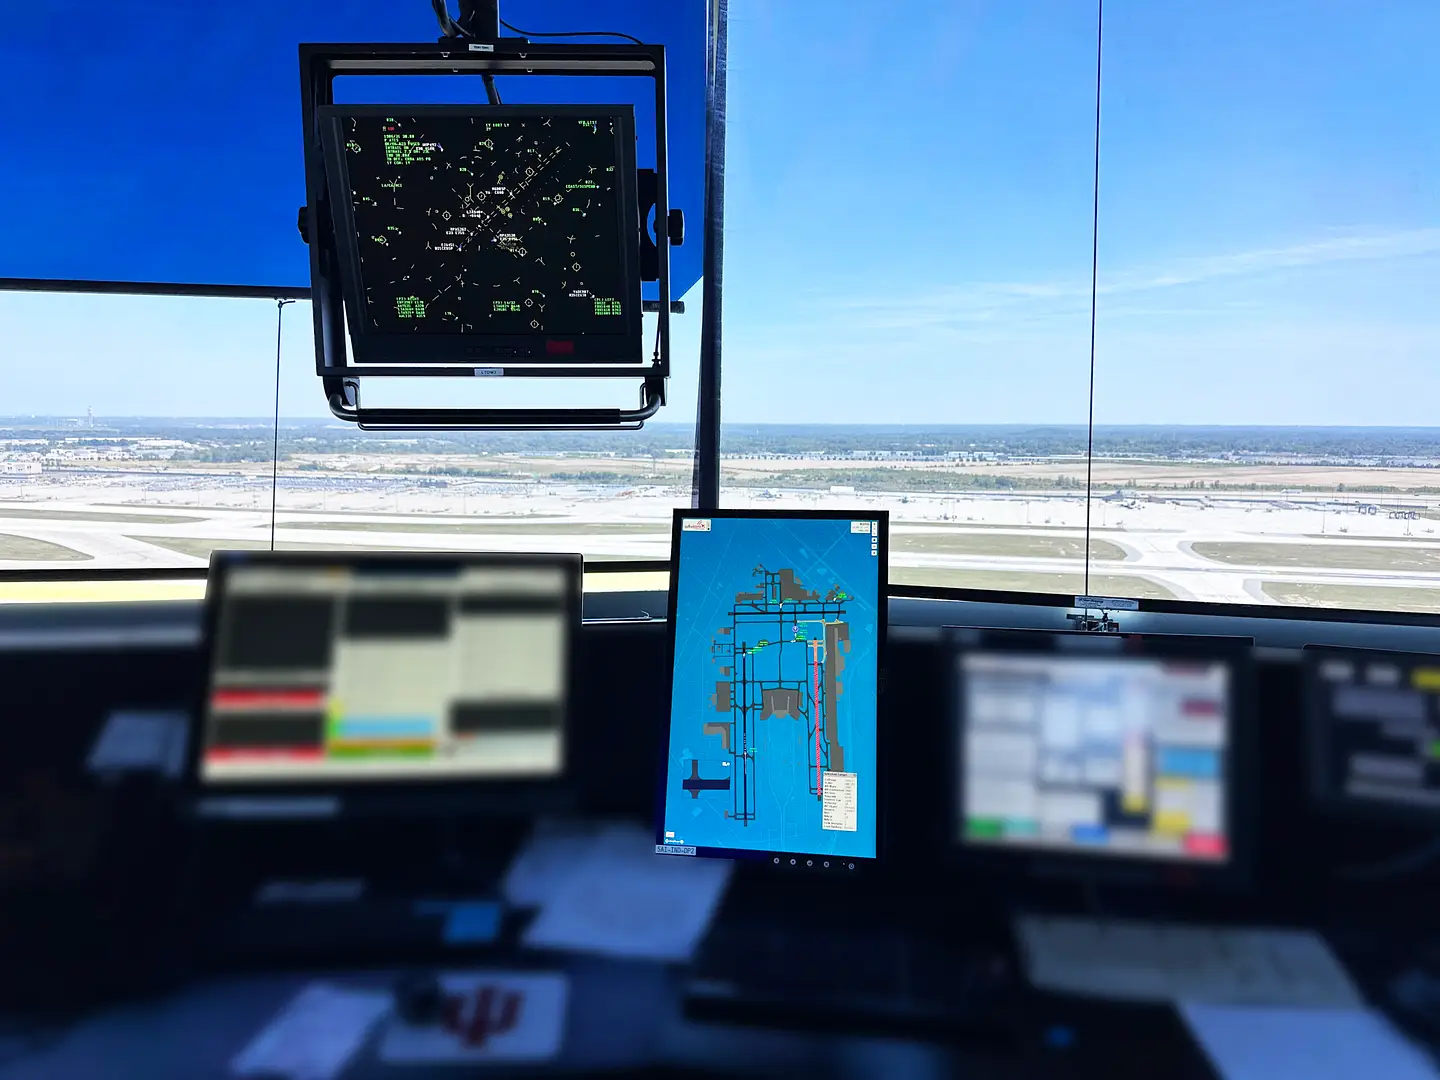 uAvionix and Capital Sciences Deliver Situational Awareness Systems for Airports